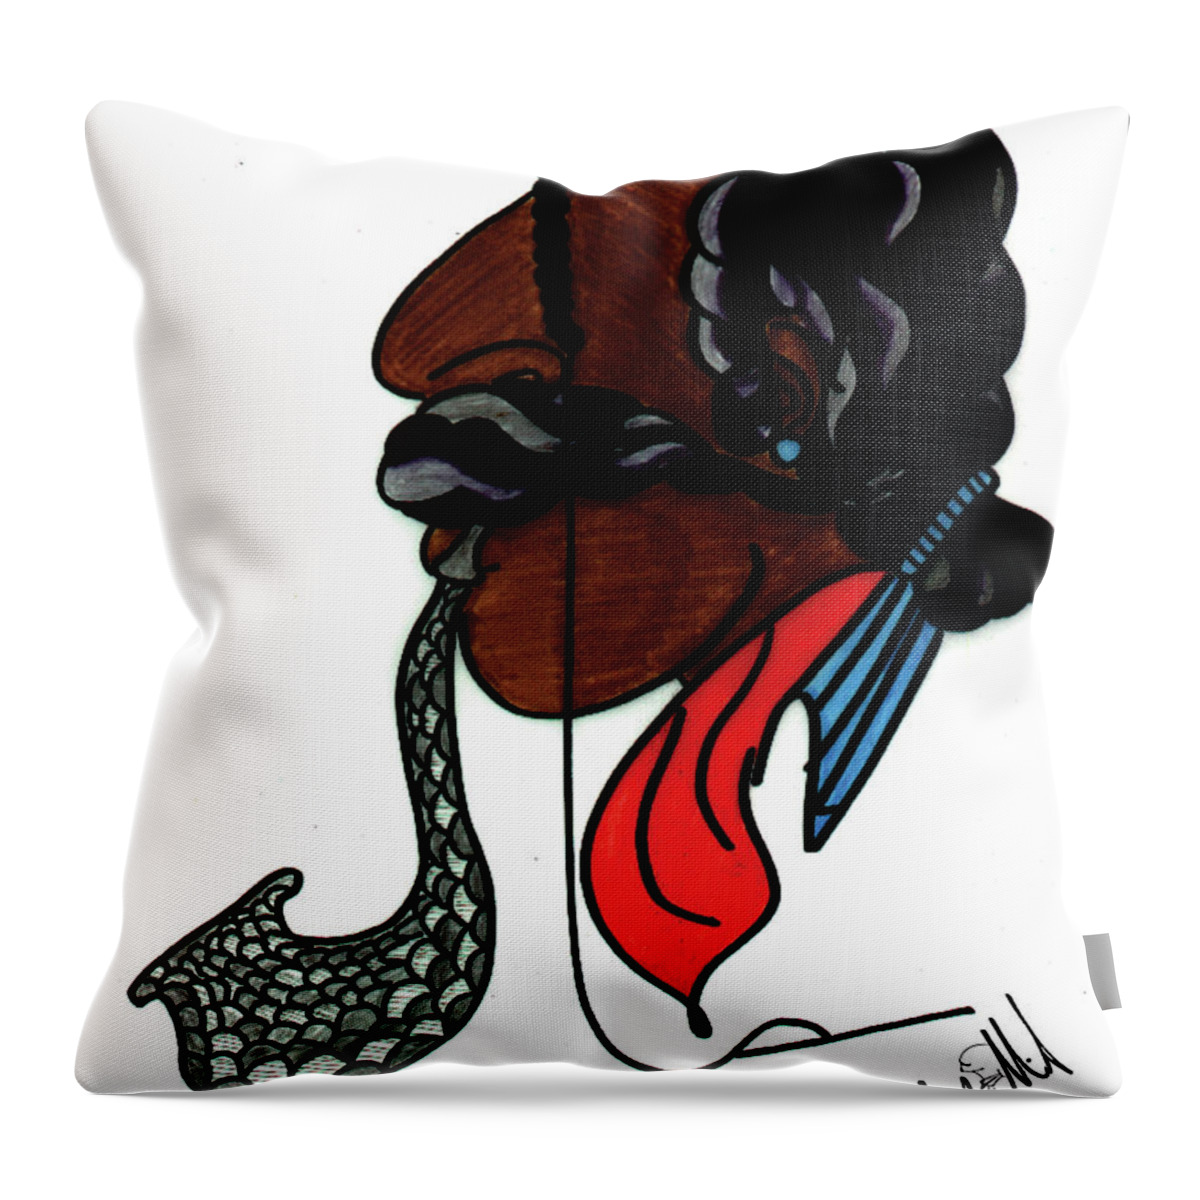  Throw Pillow featuring the painting Still Smokin by Jimmy Williams